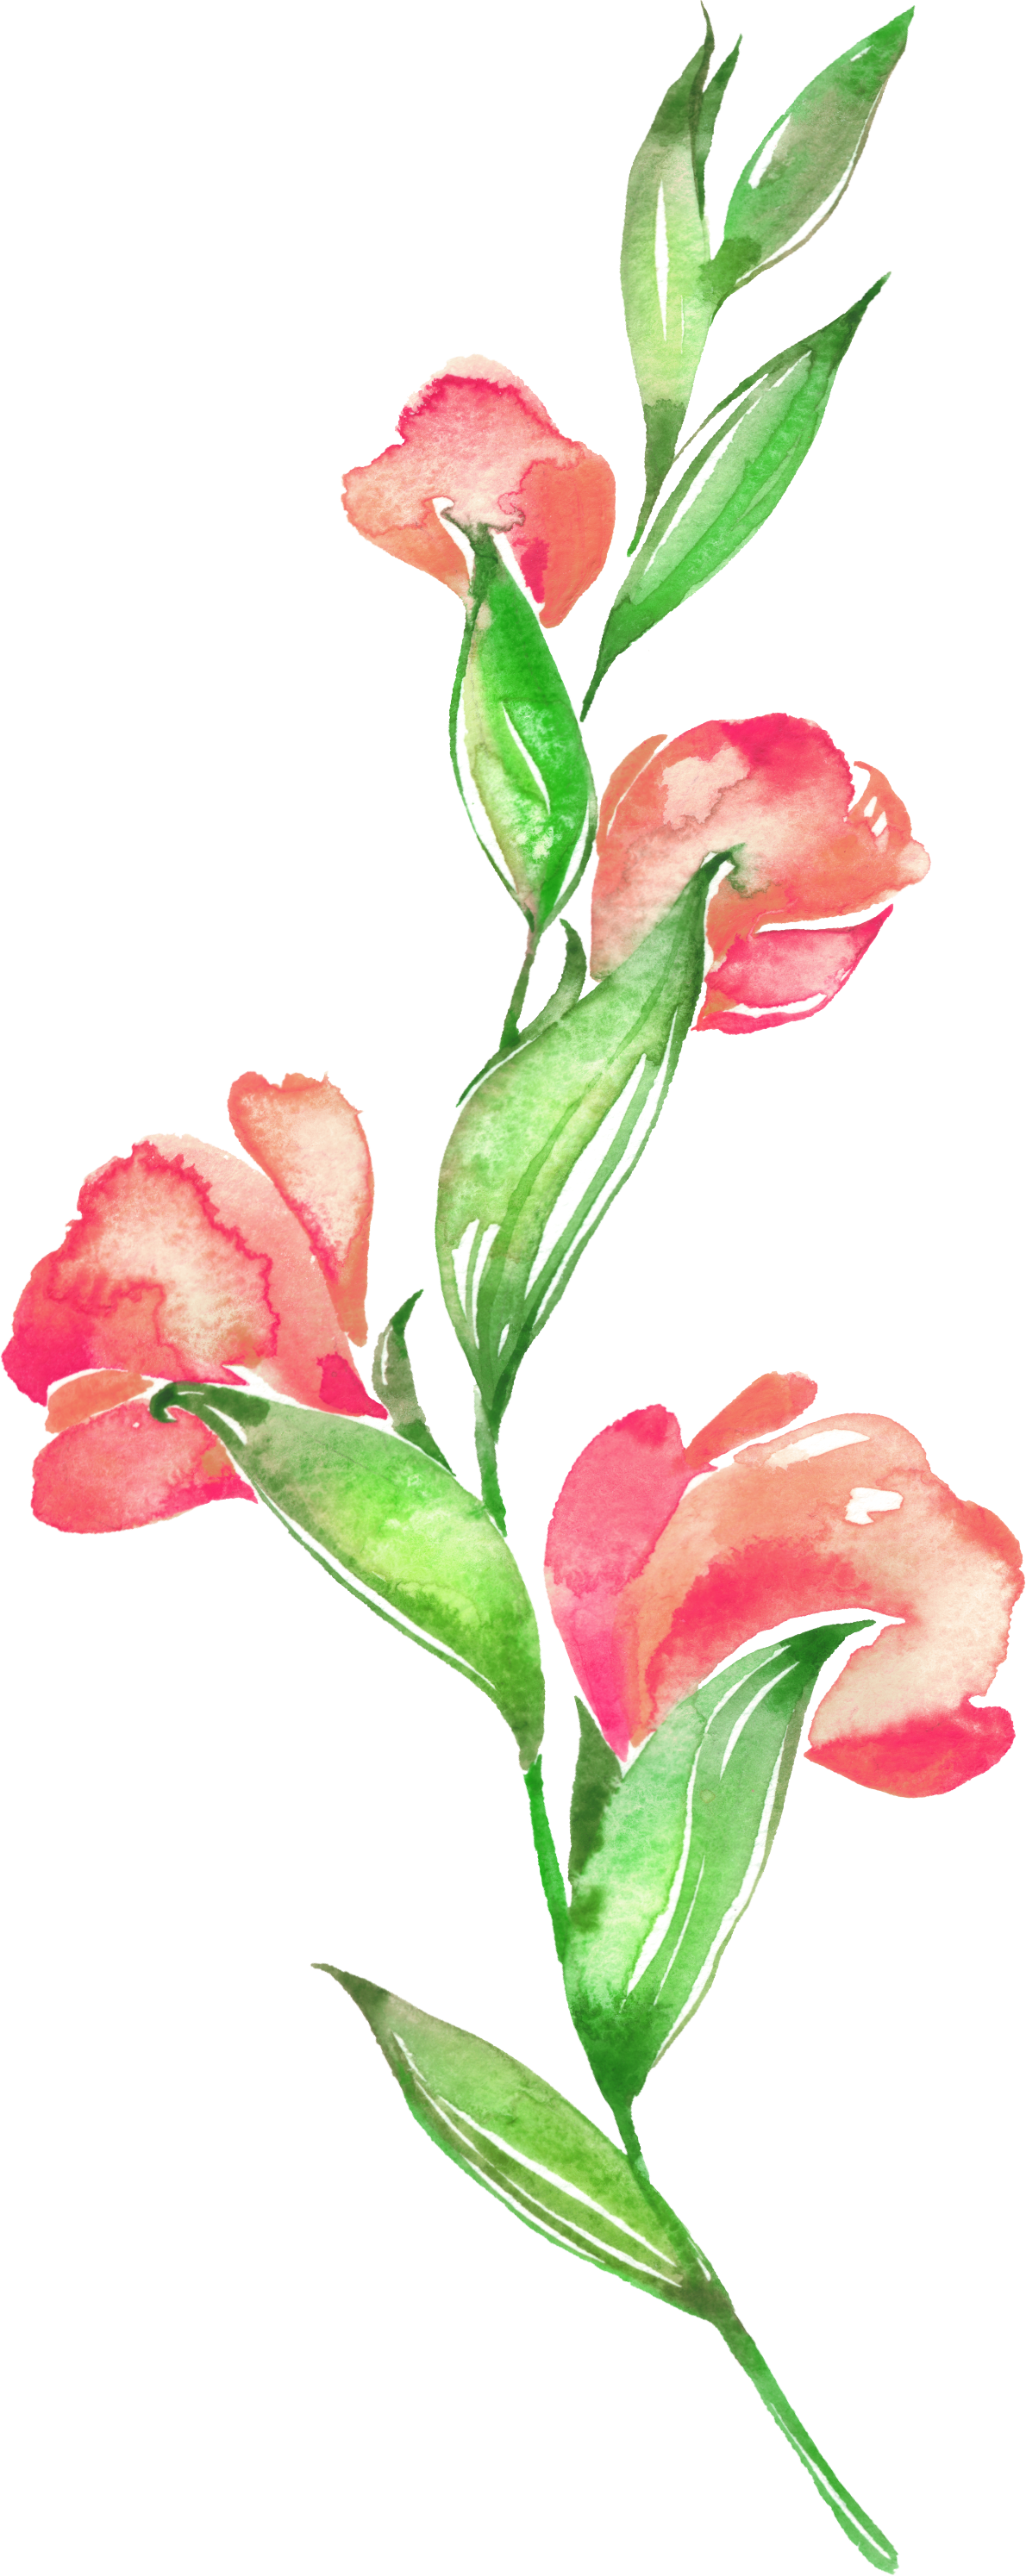 Floral Design Flower Watercolor Painting - Floral Design Flower Watercolor Painting (1190x2989)